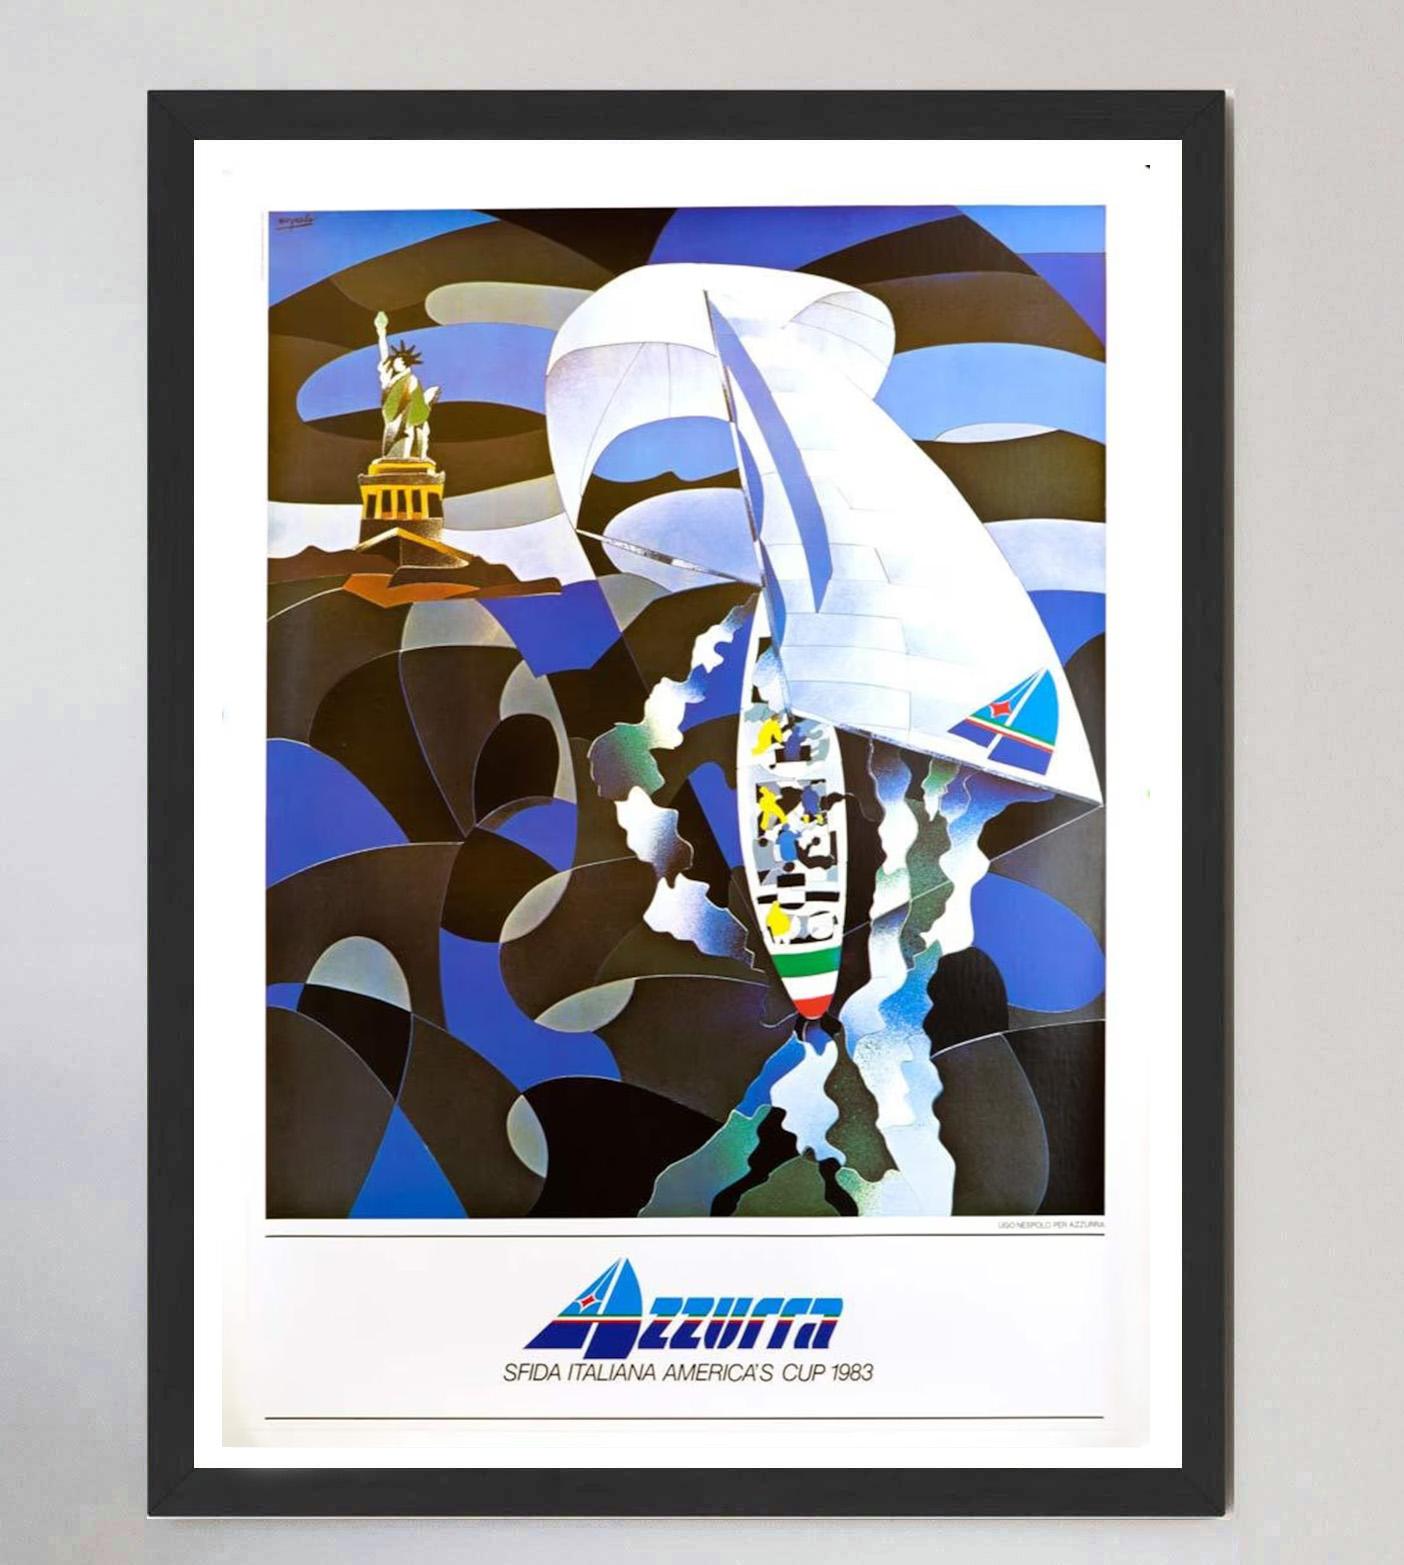 Late 20th Century 1983 America's Cup Original Vintage Poster For Sale